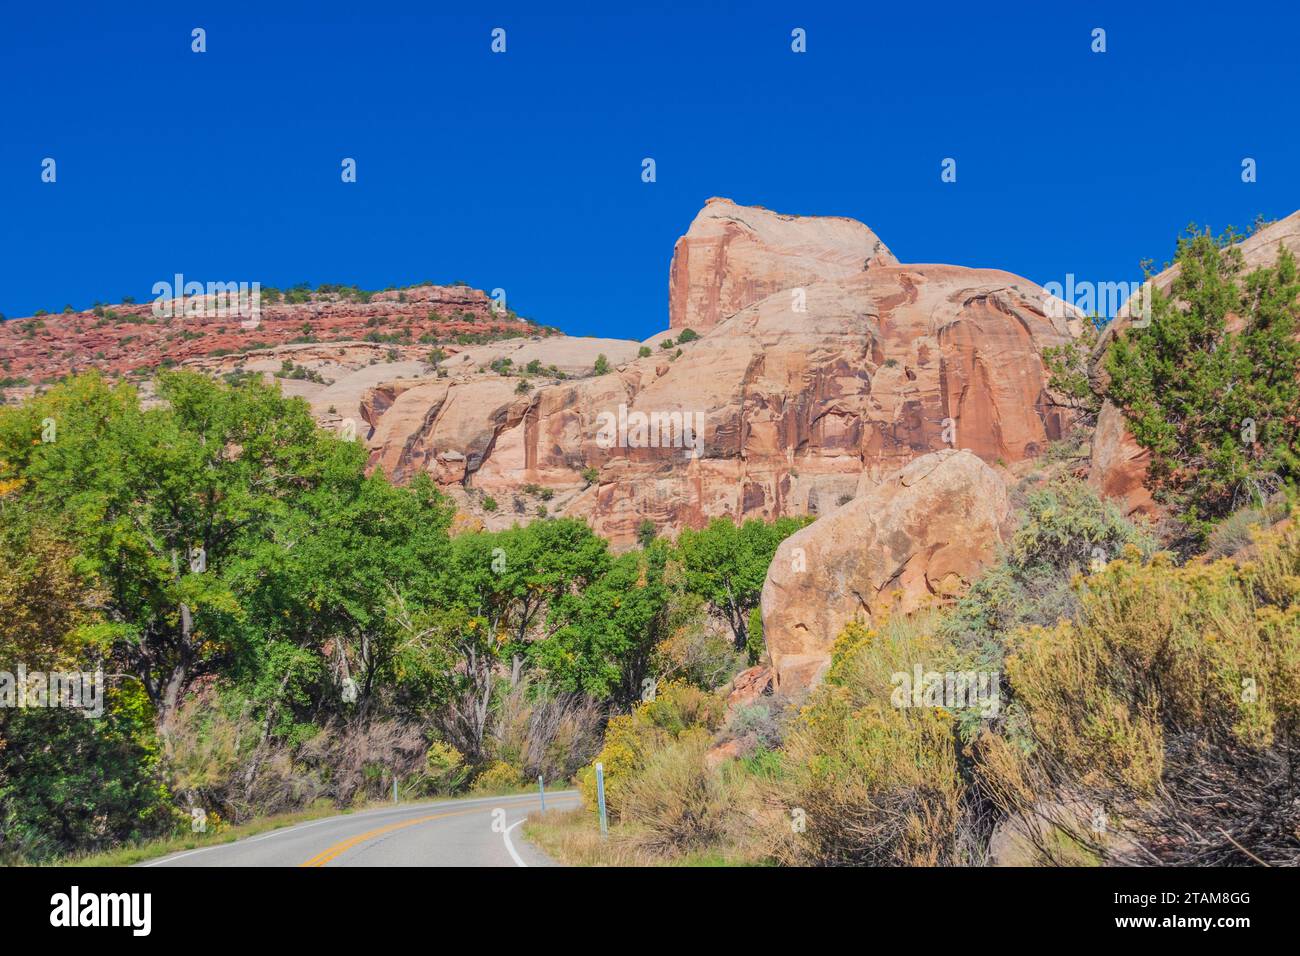 Utah 211 scenic byway in Utah, designated as Indian Creek Corridor Scenic Byway, passes through a landscape of sandstone rocks and formations. Stock Photo